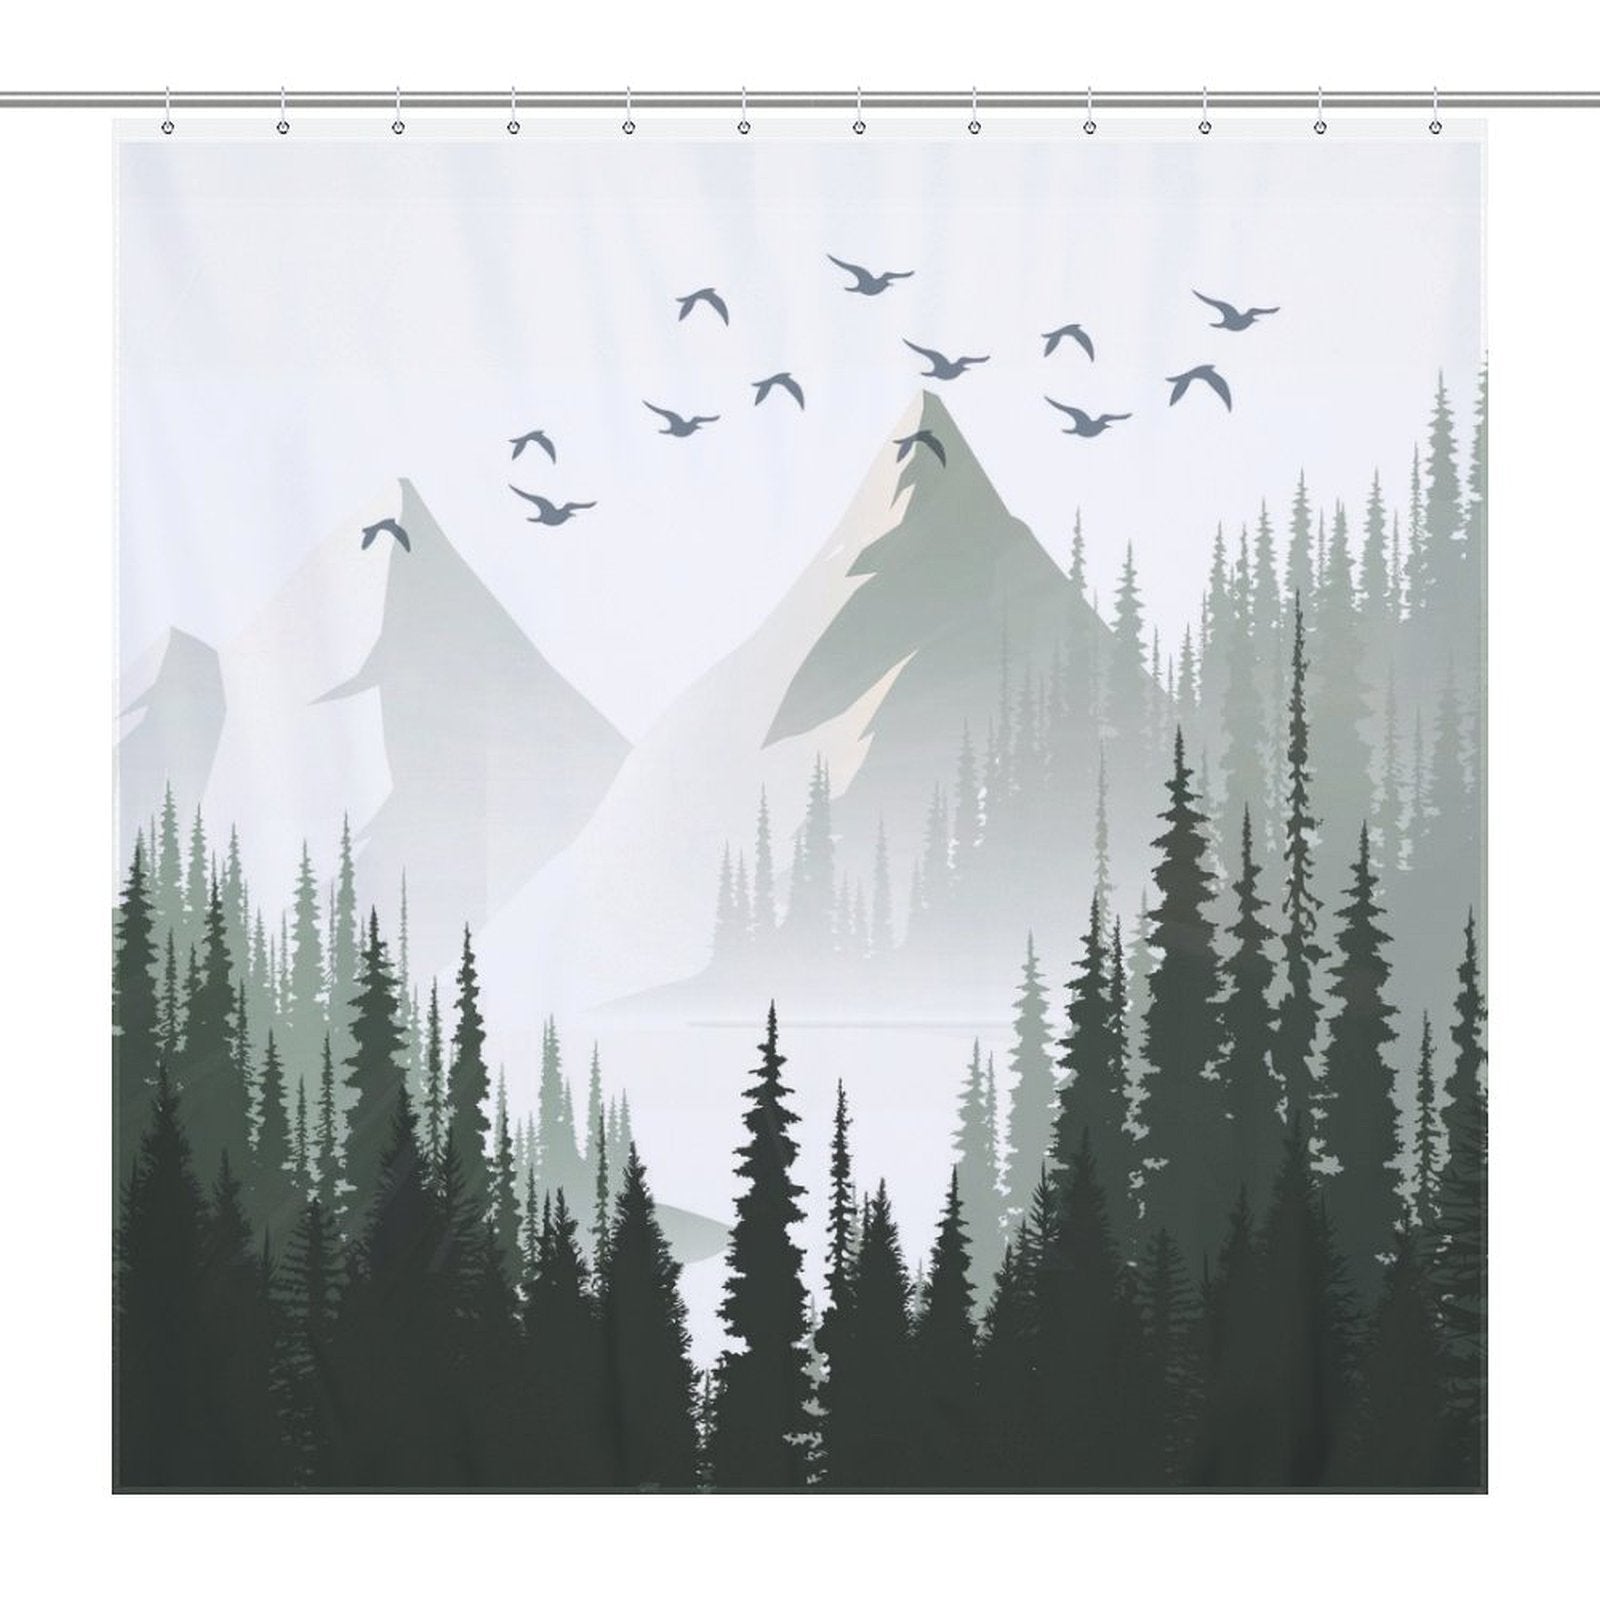 A Green Misty Forest Shower Curtain Ombre Sage Green White Nature Tree Mountain Woodland-Cottoncat by Cotton Cat featuring an illustration of a misty forest with towering evergreen trees and a flock of birds soaring in the sky, perfect for elevating your bathroom decor.